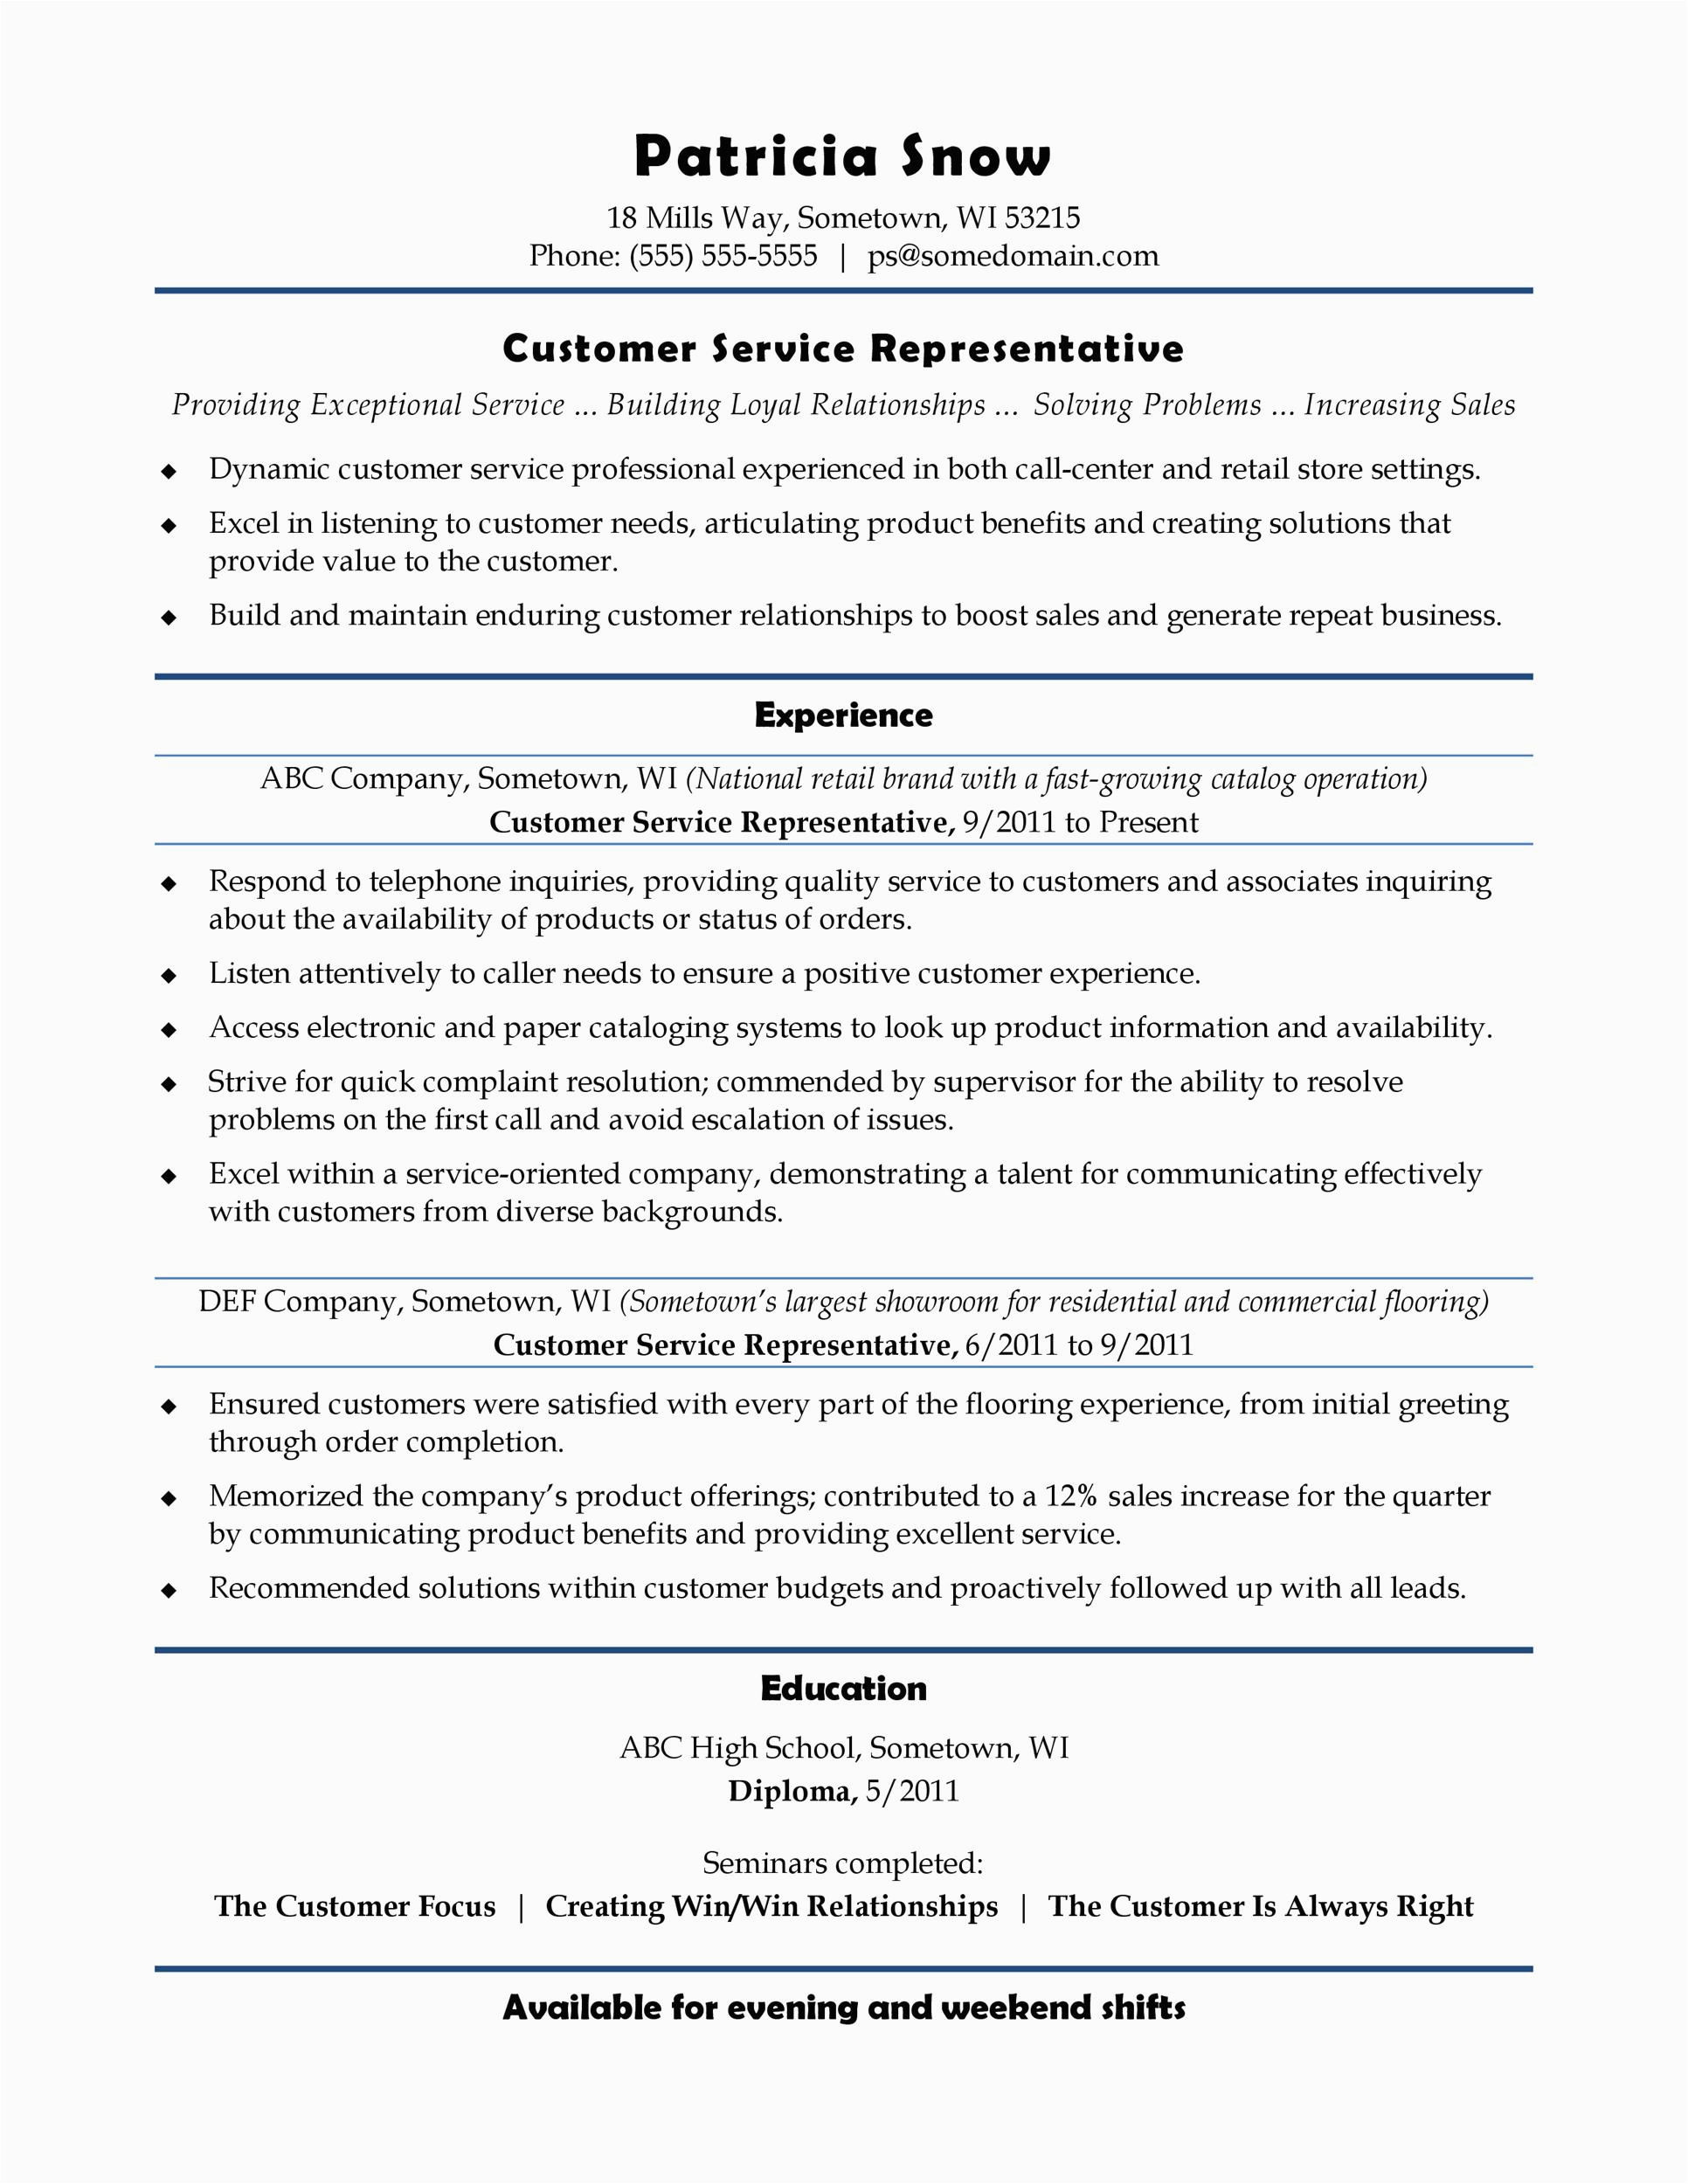 Sample for Resume for Customer Service 30 Customer Service Resume Examples Template Lab